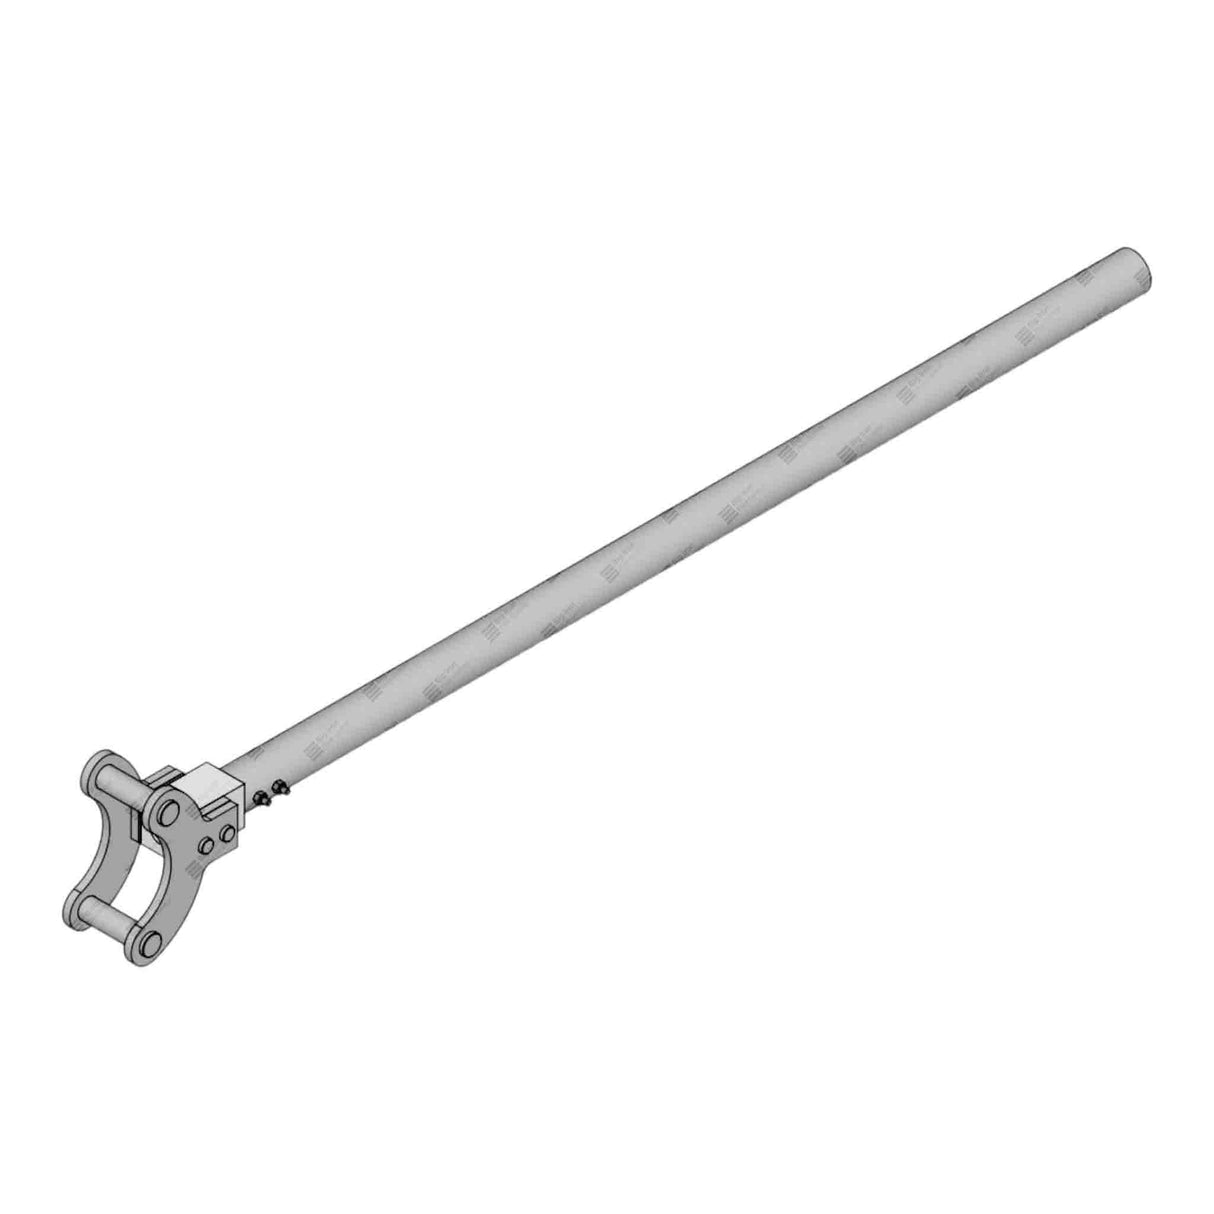 Wing Nut Wrench, 2" 602, 4 FT